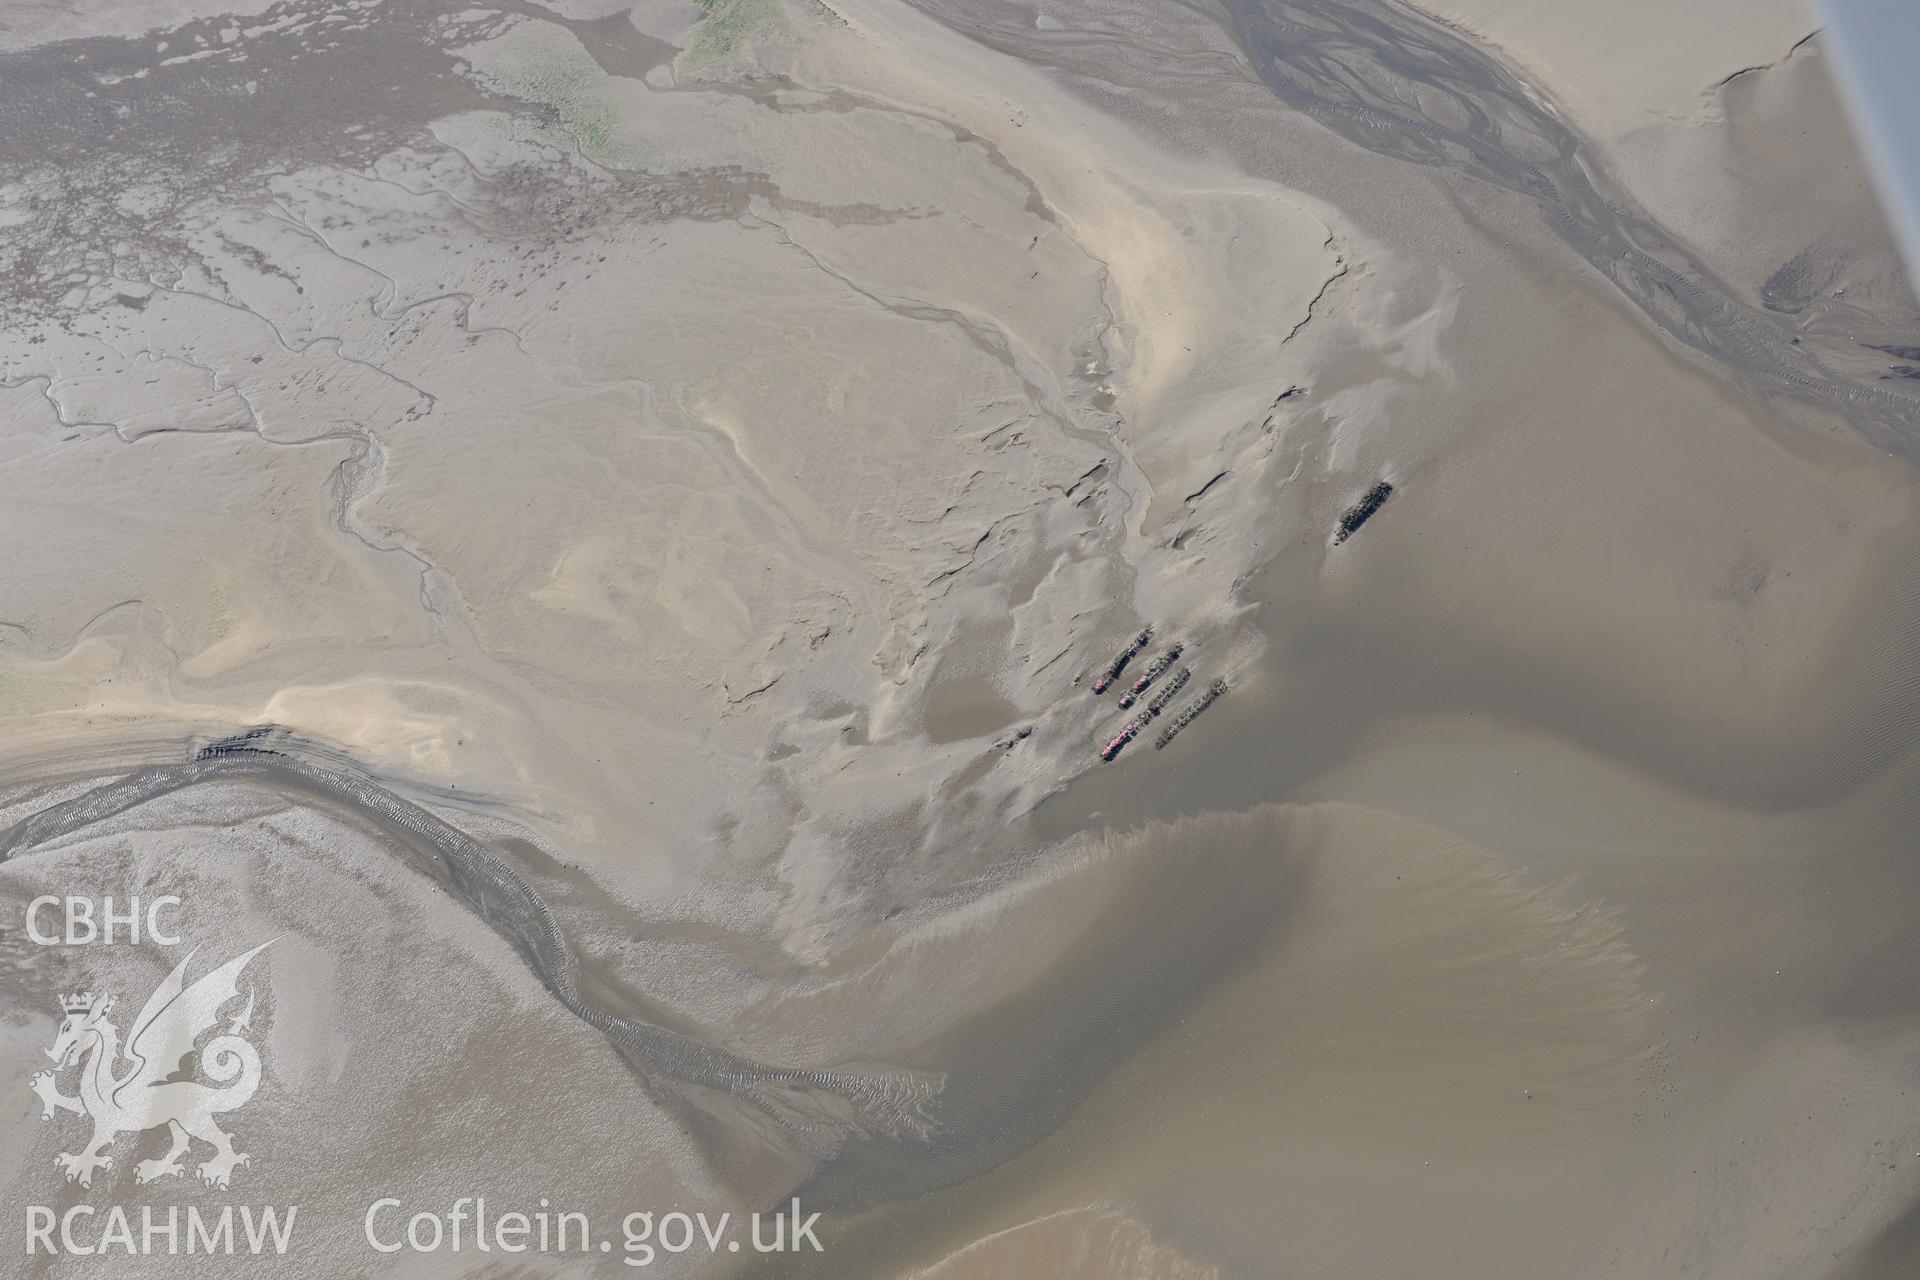 Llanrhidian Sands, on the northern shores of the Gower Peninsula. Oblique aerial photograph taken during the Royal Commission's programme of archaeological aerial reconnaissance by Toby Driver on 30th September 2015.